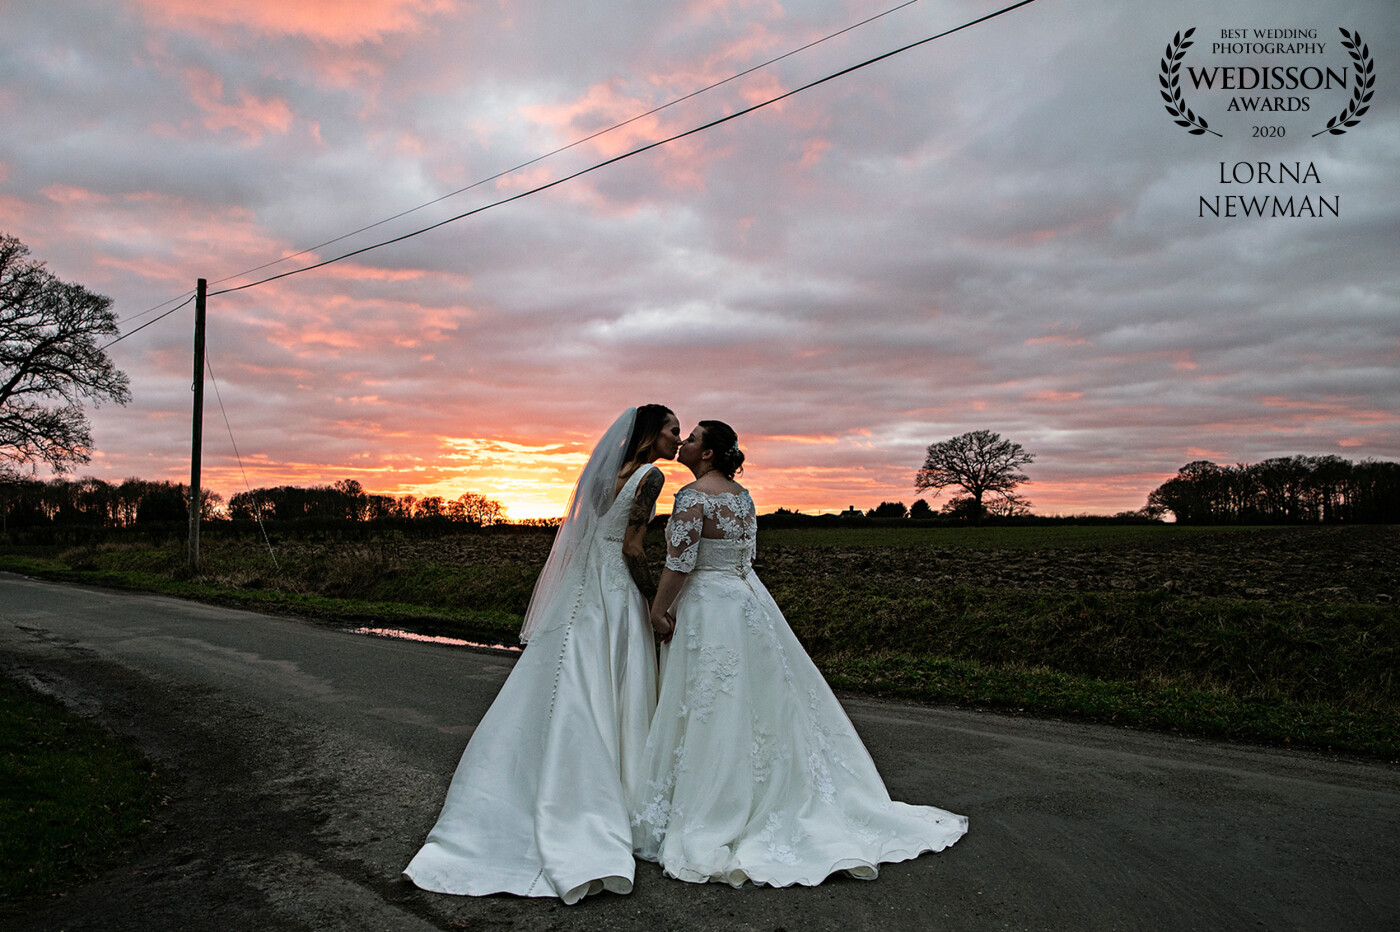 I am so happy that lovely Jessica & Rachel’s beautiful wedding at The Compasses at Pattiswick has won a Wedisson award.<br />
This was my first wedding of the year (and century) Jessica & Rachel had a beautiful sunset to finish their day off to make it just perfect.